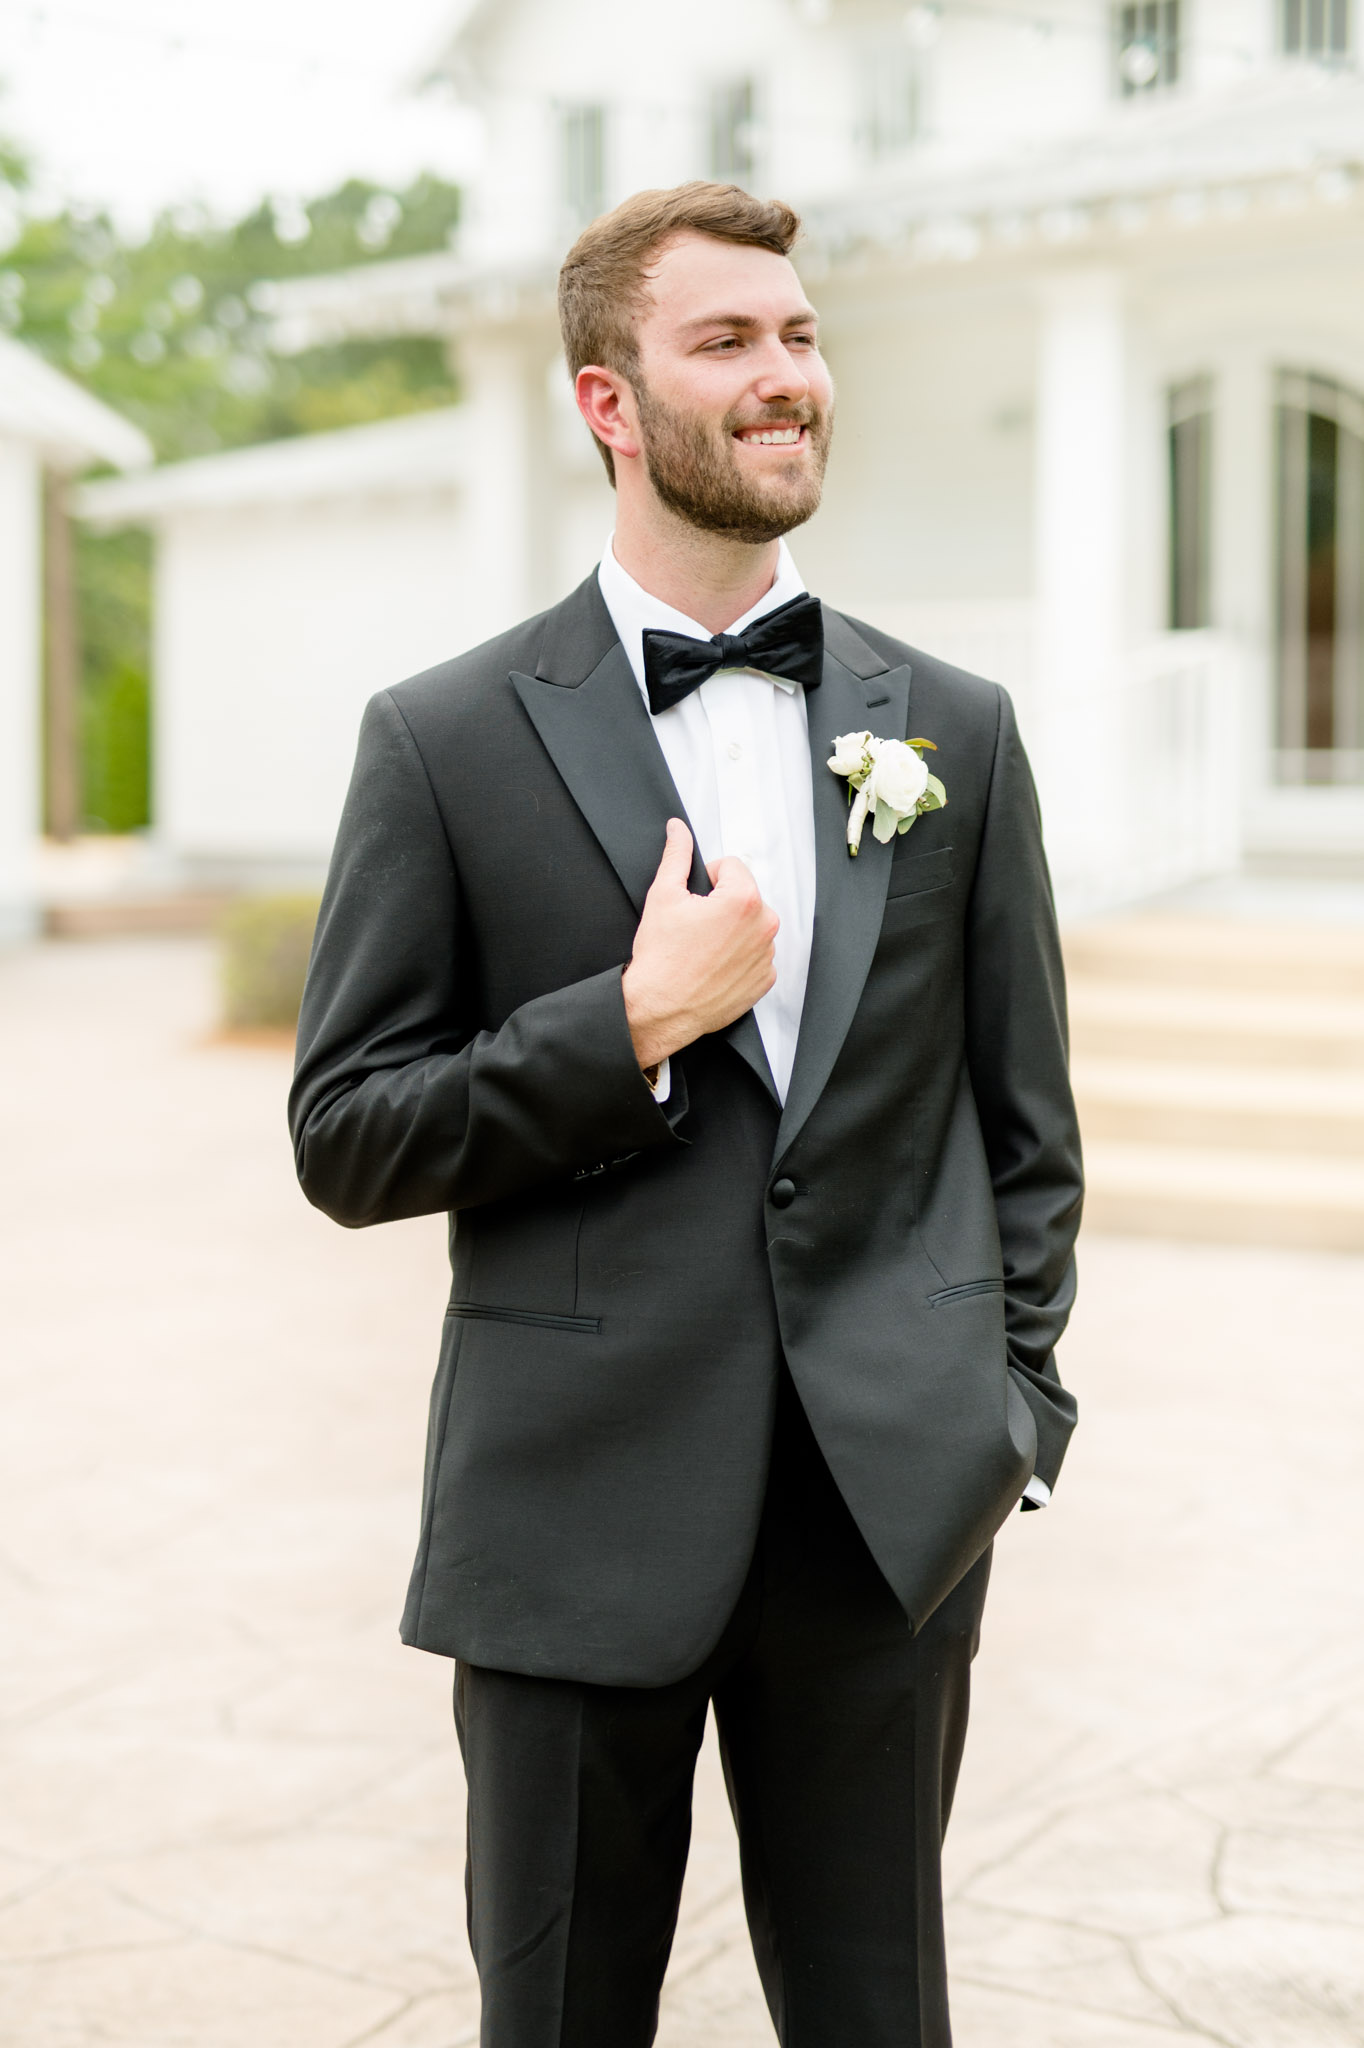 Groom looks over shoulder and smiles.